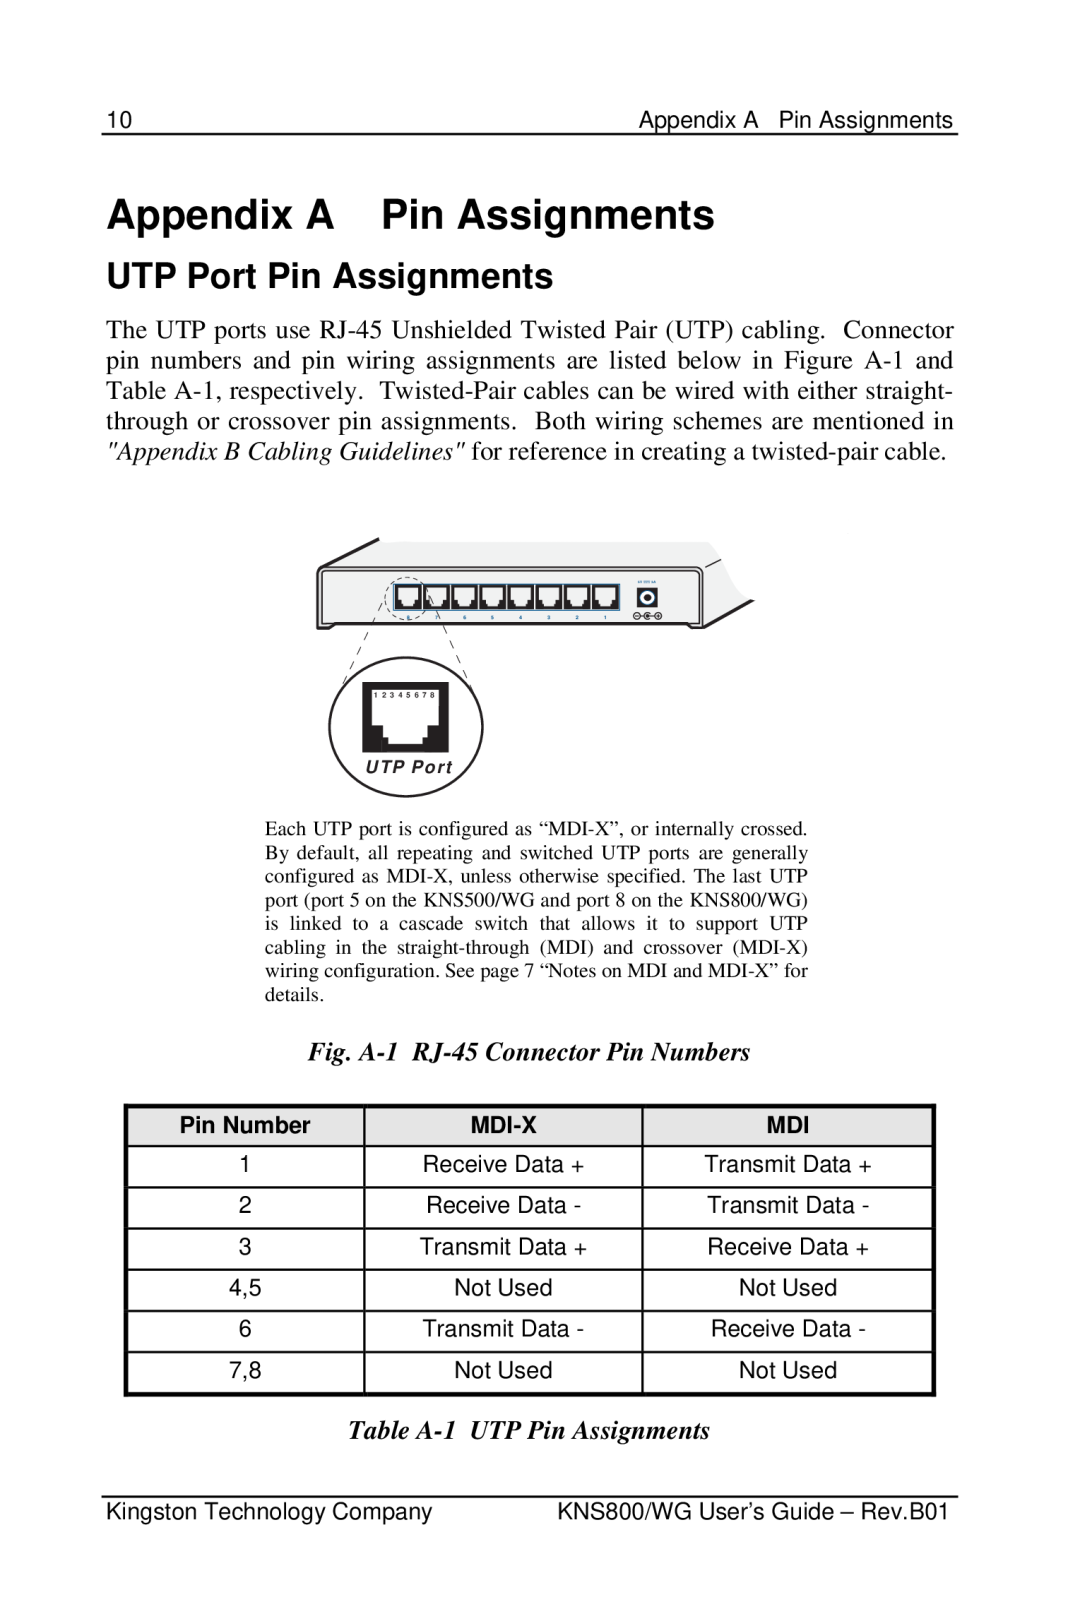 Kingston Technology KNS800/WG Appendix A Pin Assignments, UTP Port Pin Assignments, Fig. A-1 RJ-45 Connector Pin Numbers 